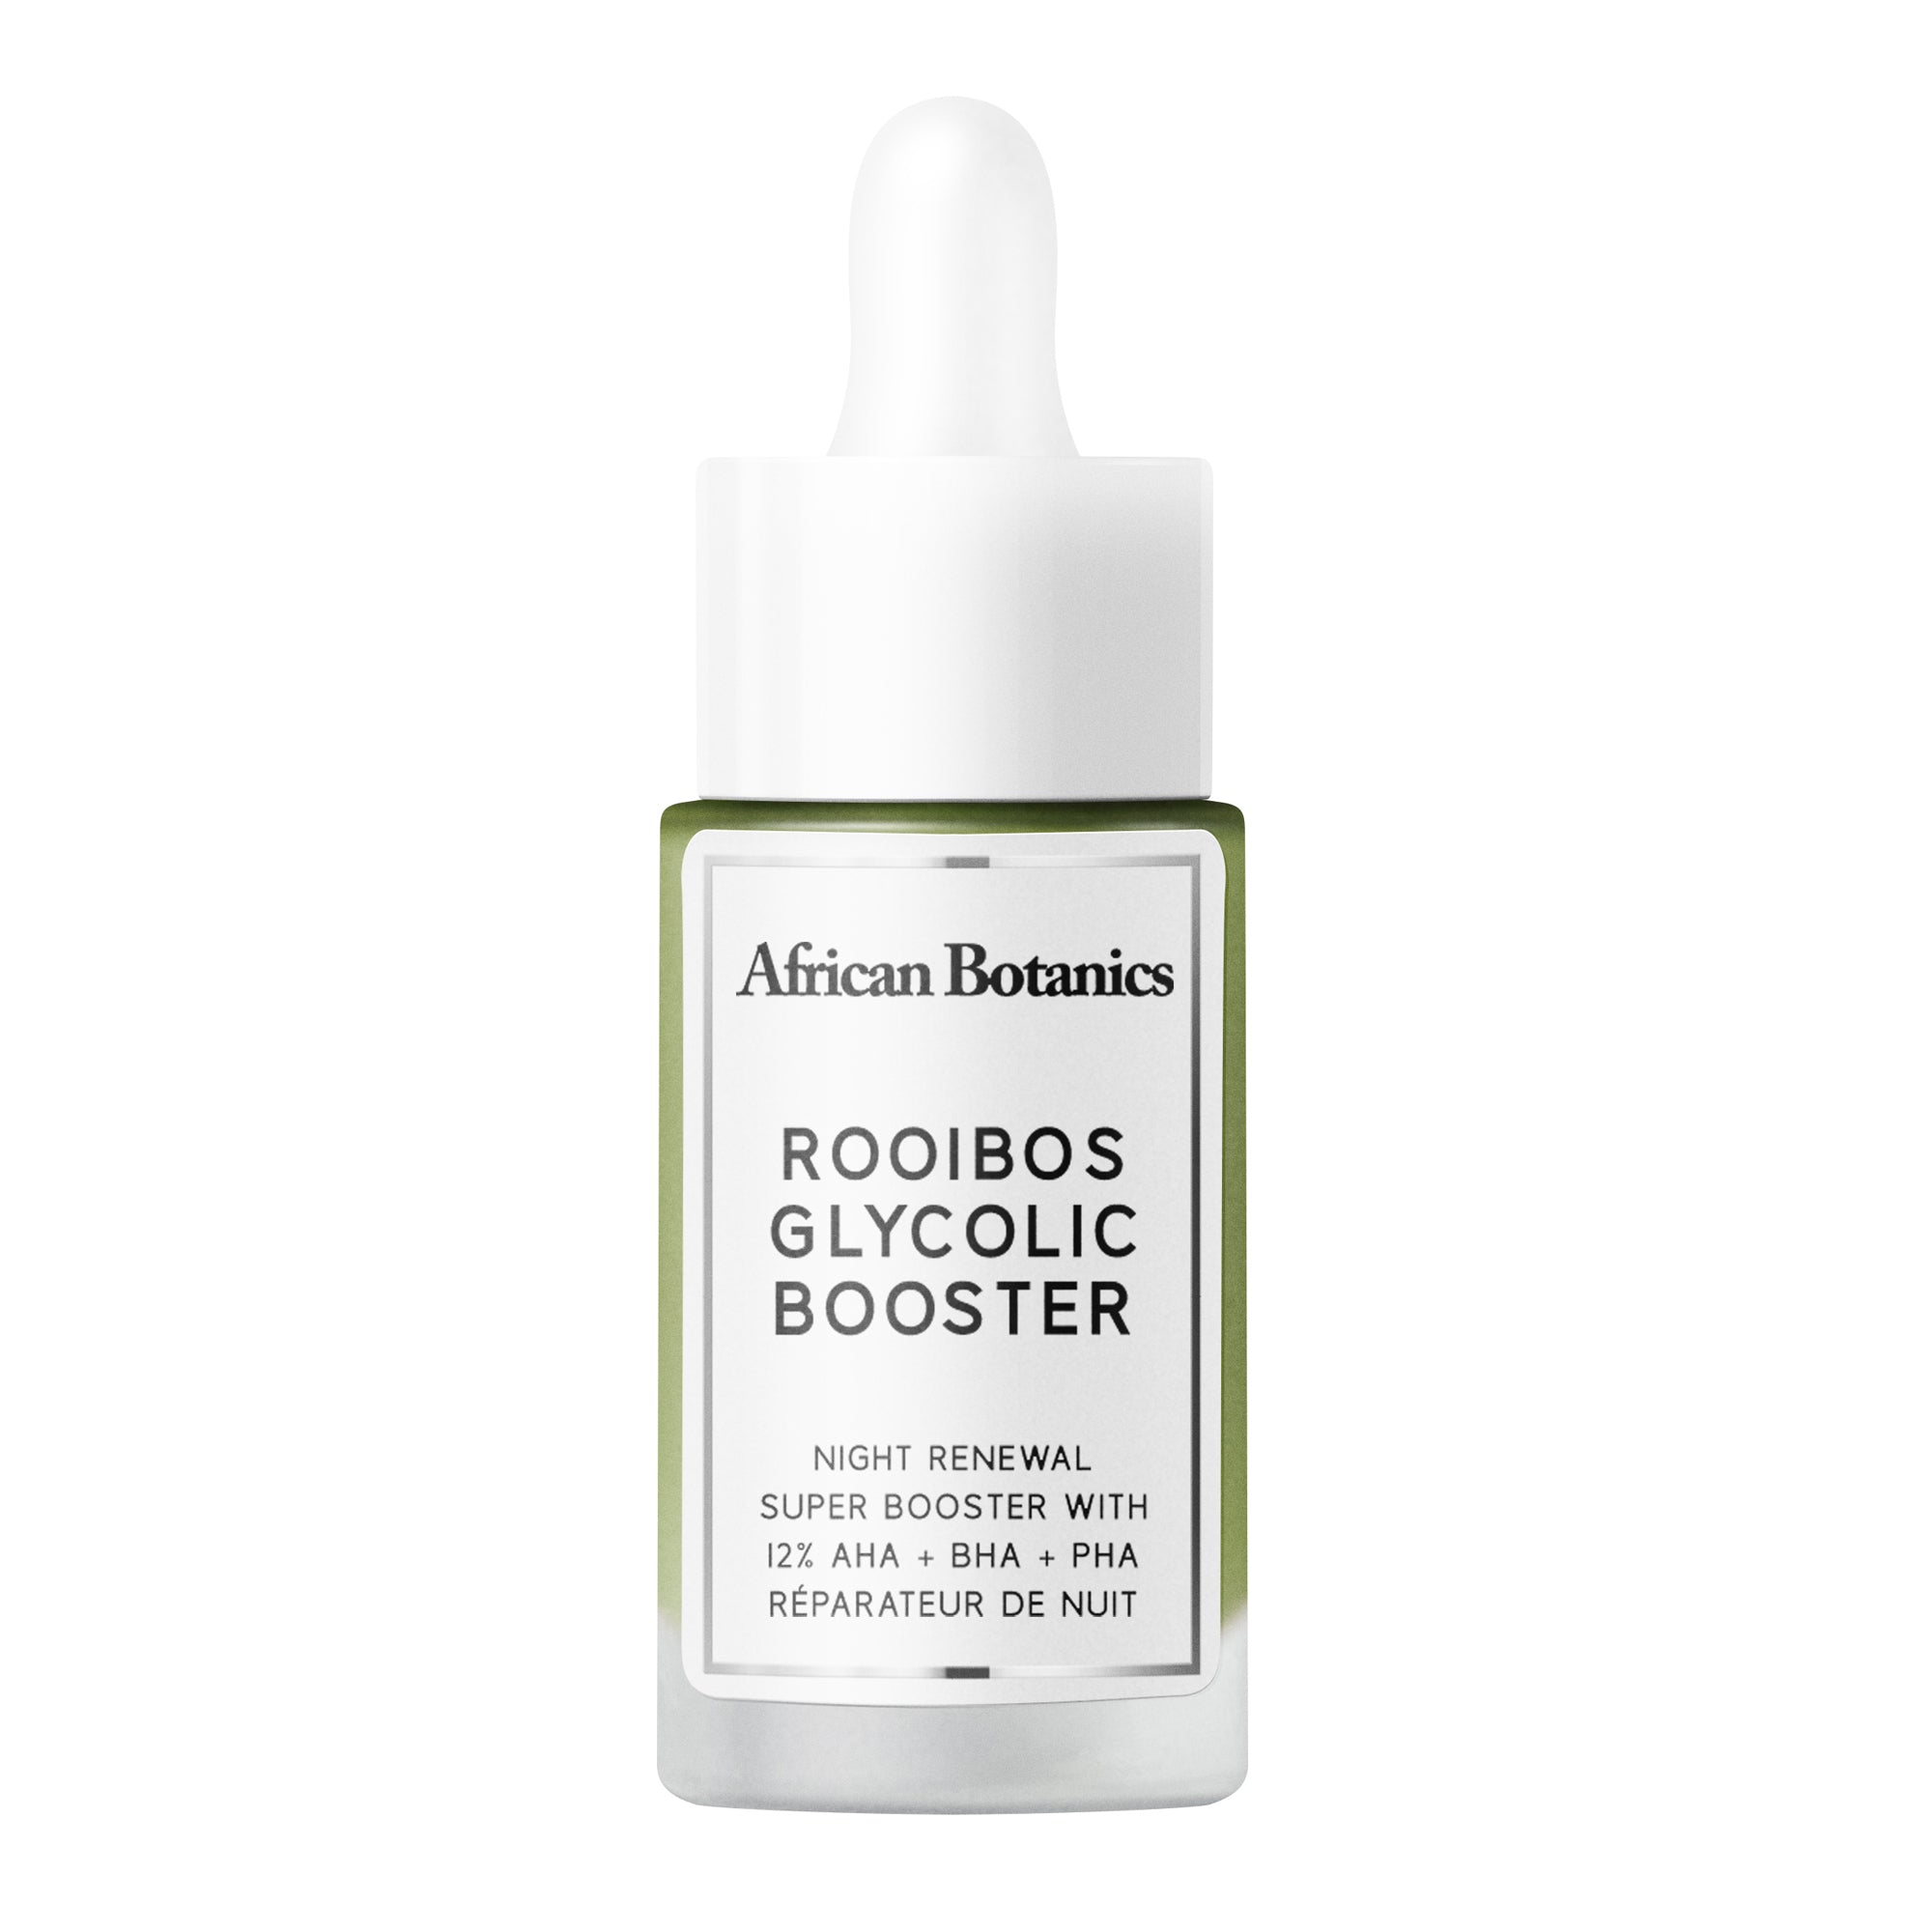 
  
  African Botanics Rooibos Glycolic Booster
  
